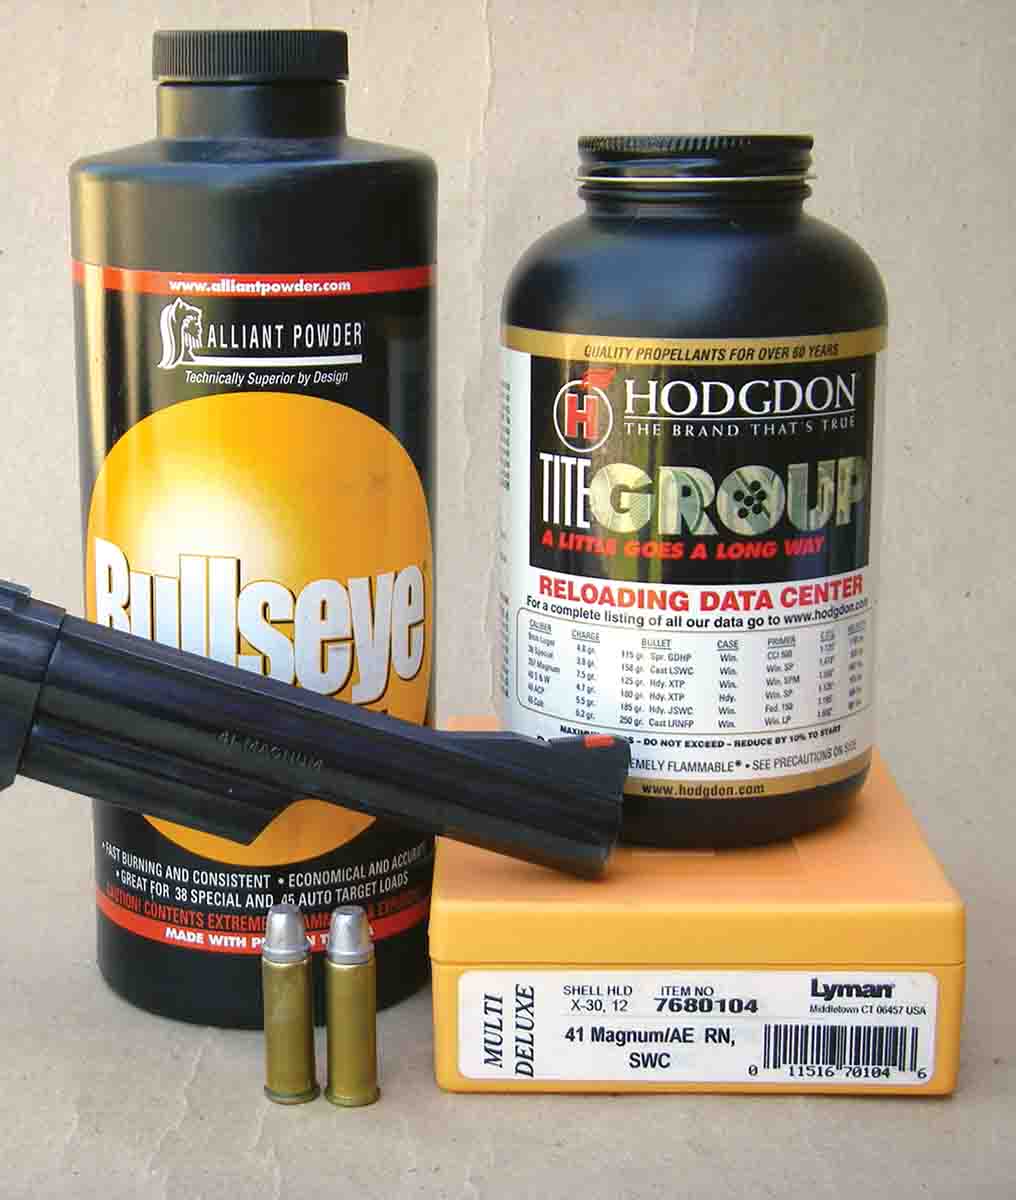 Alliant Bullseye and Hodgdon Titegroup powders work well for target velocity .41 Magnum loads containing 220-grain Keith-style cast bullets.